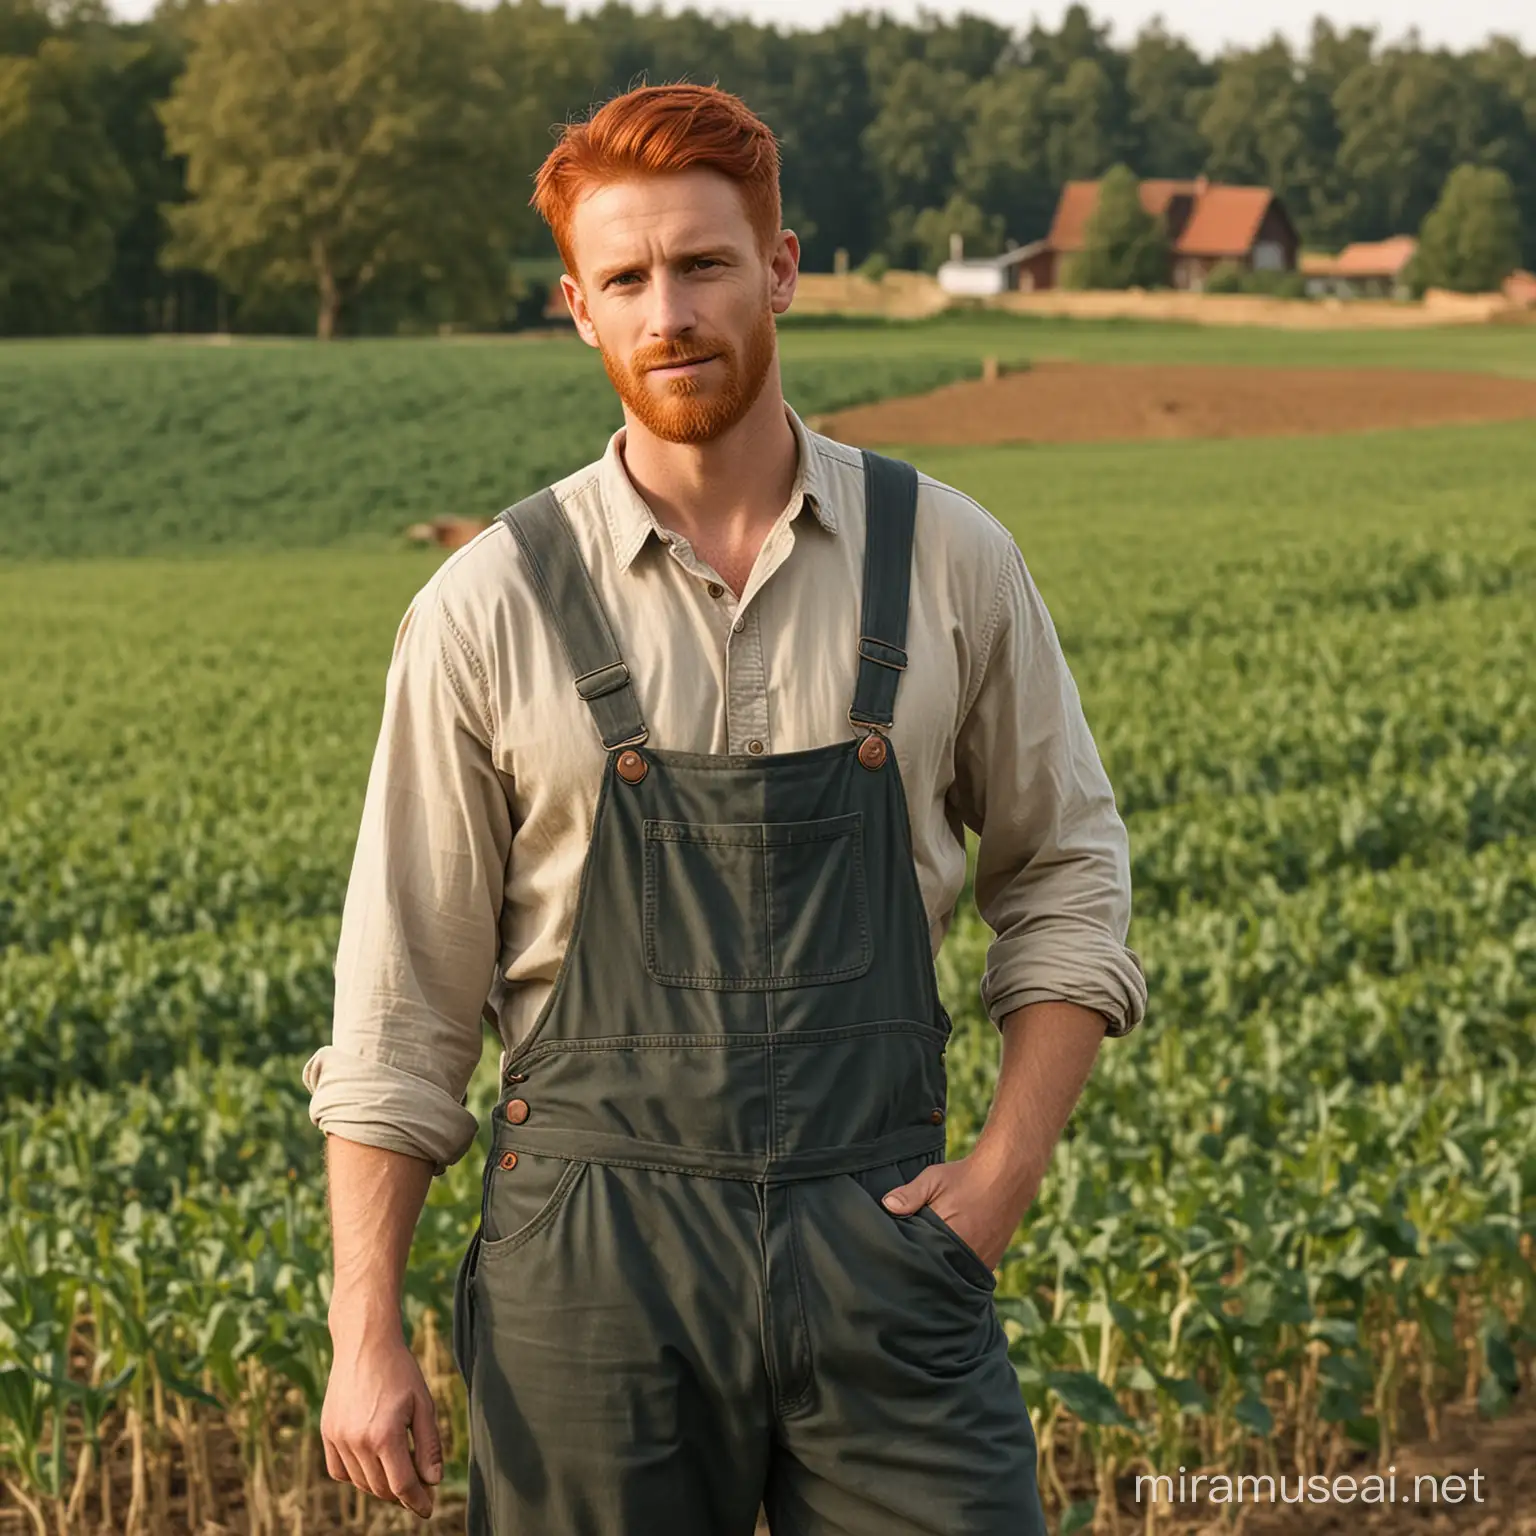 RedHaired Farmer in Simple Clothing Tending Crops